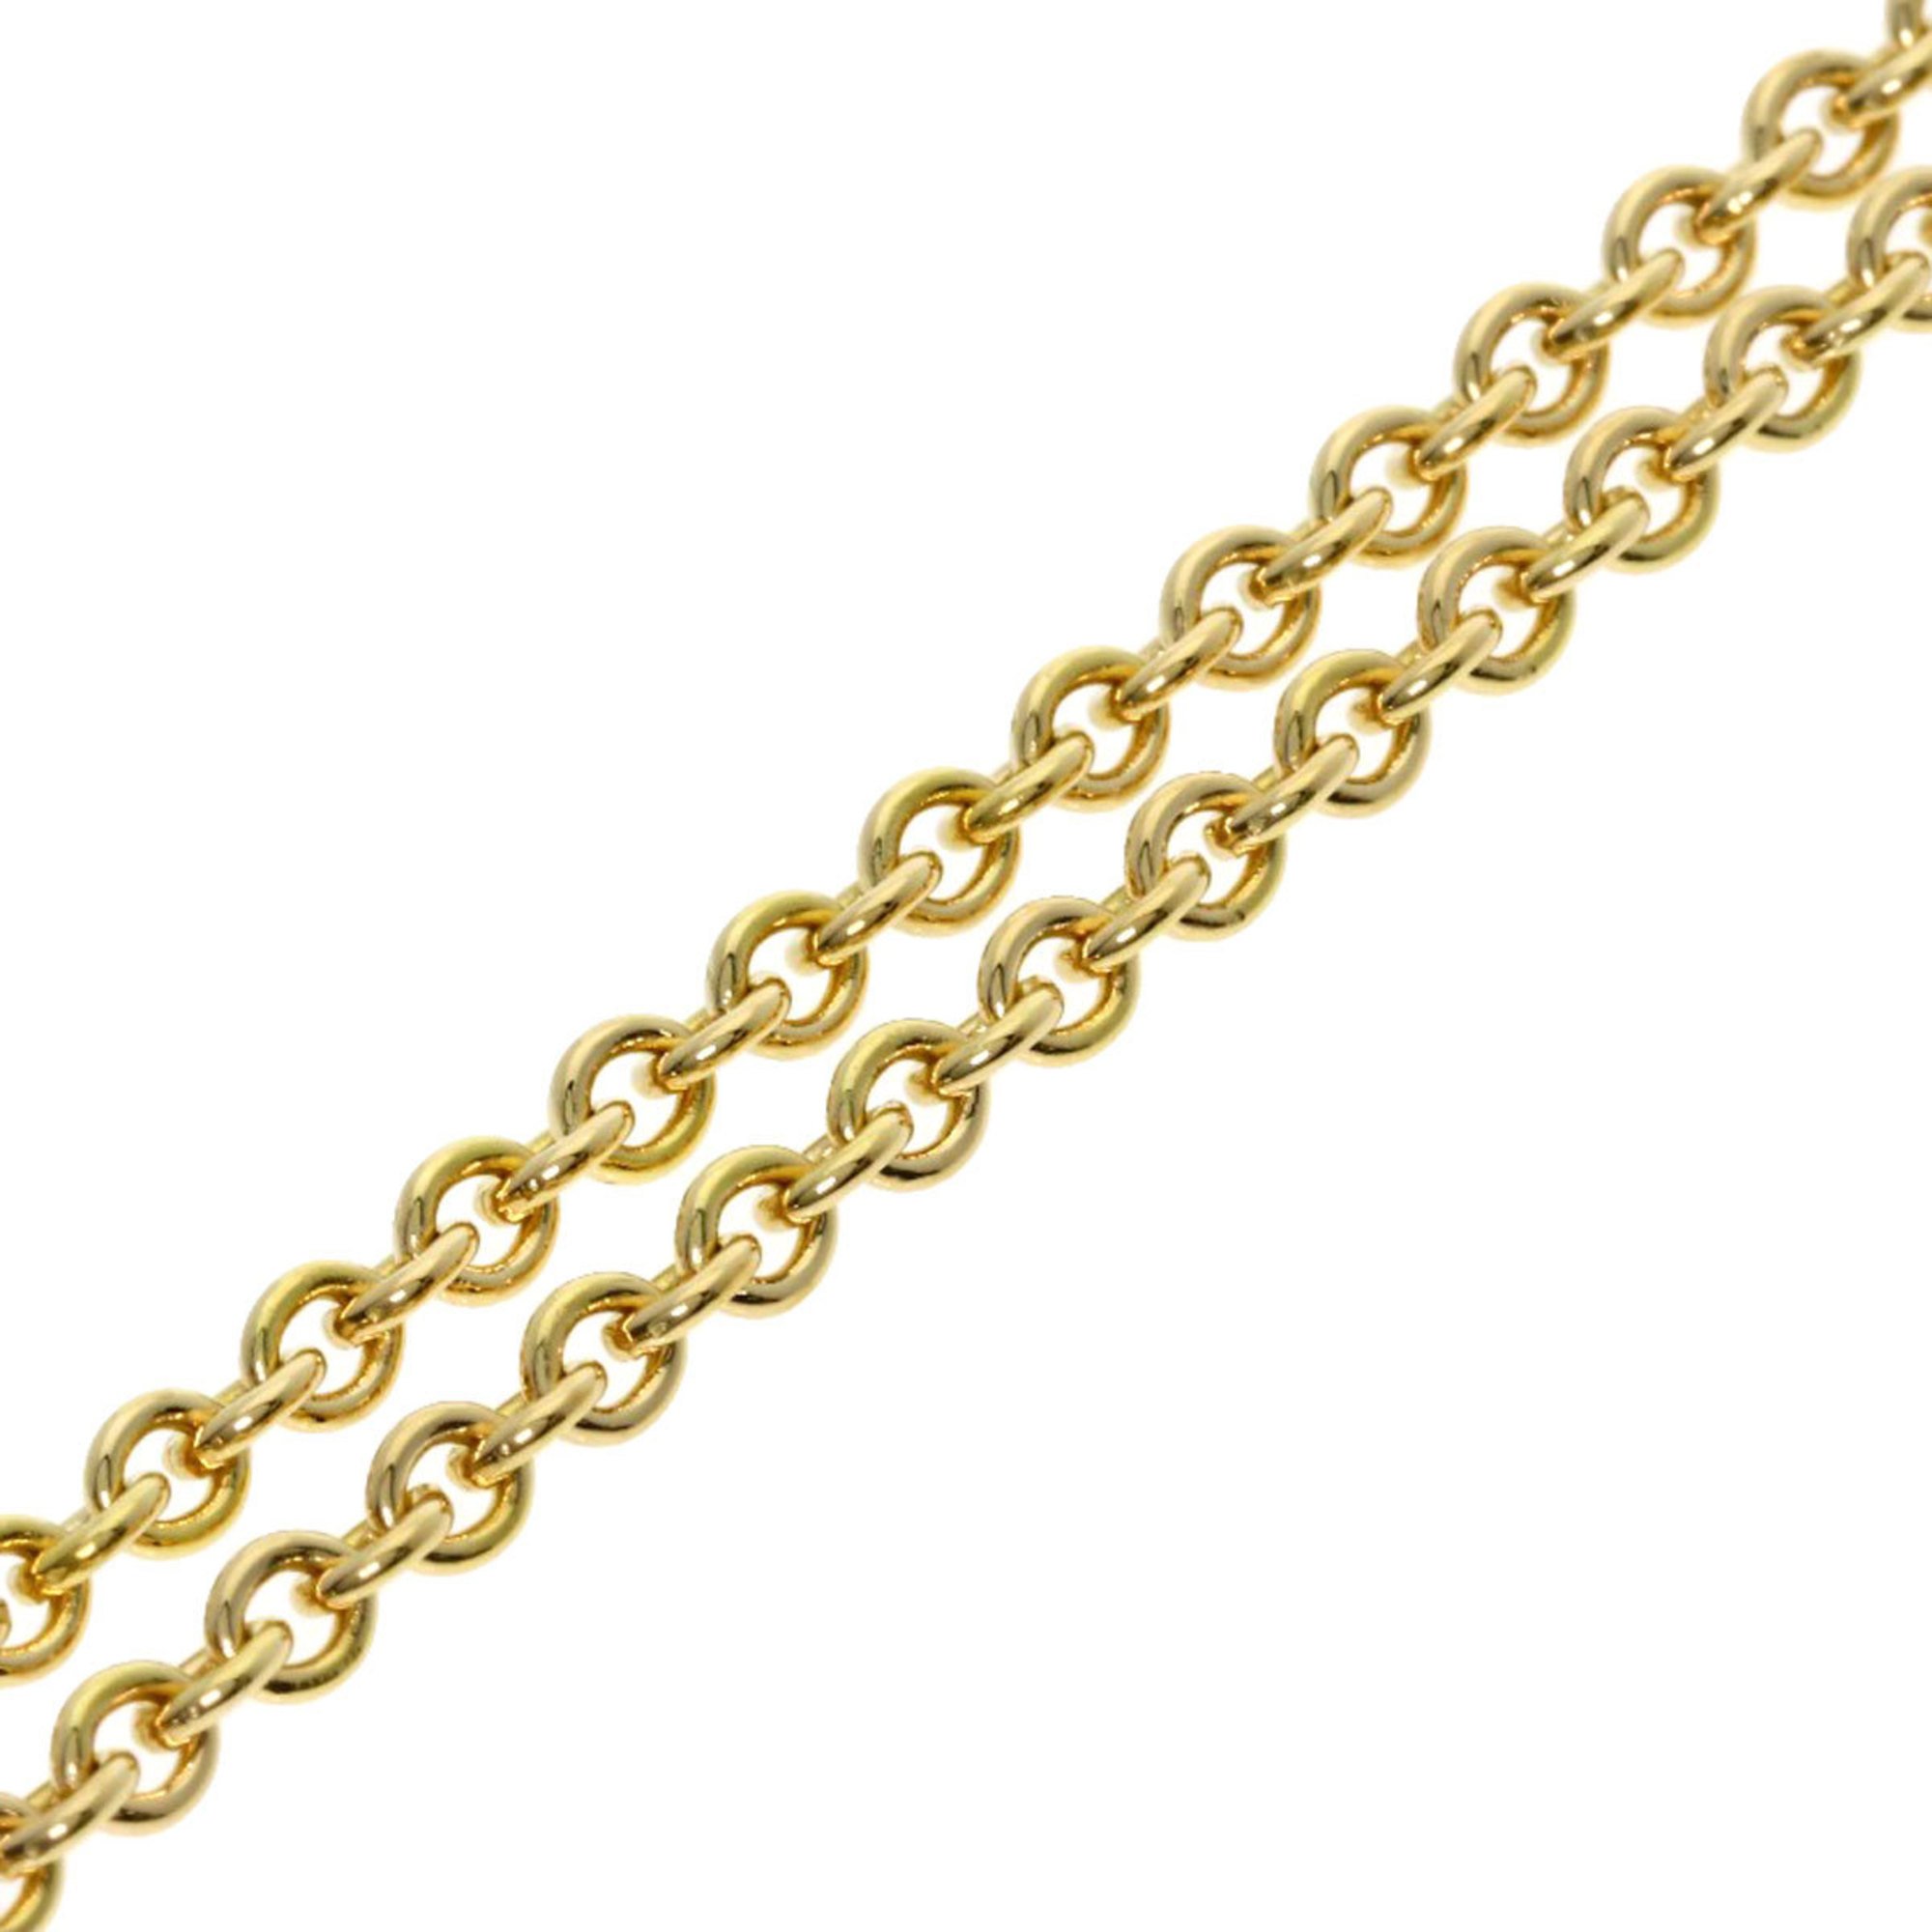 Cartier Chain Only 41 Necklace K18 Yellow Gold Women's